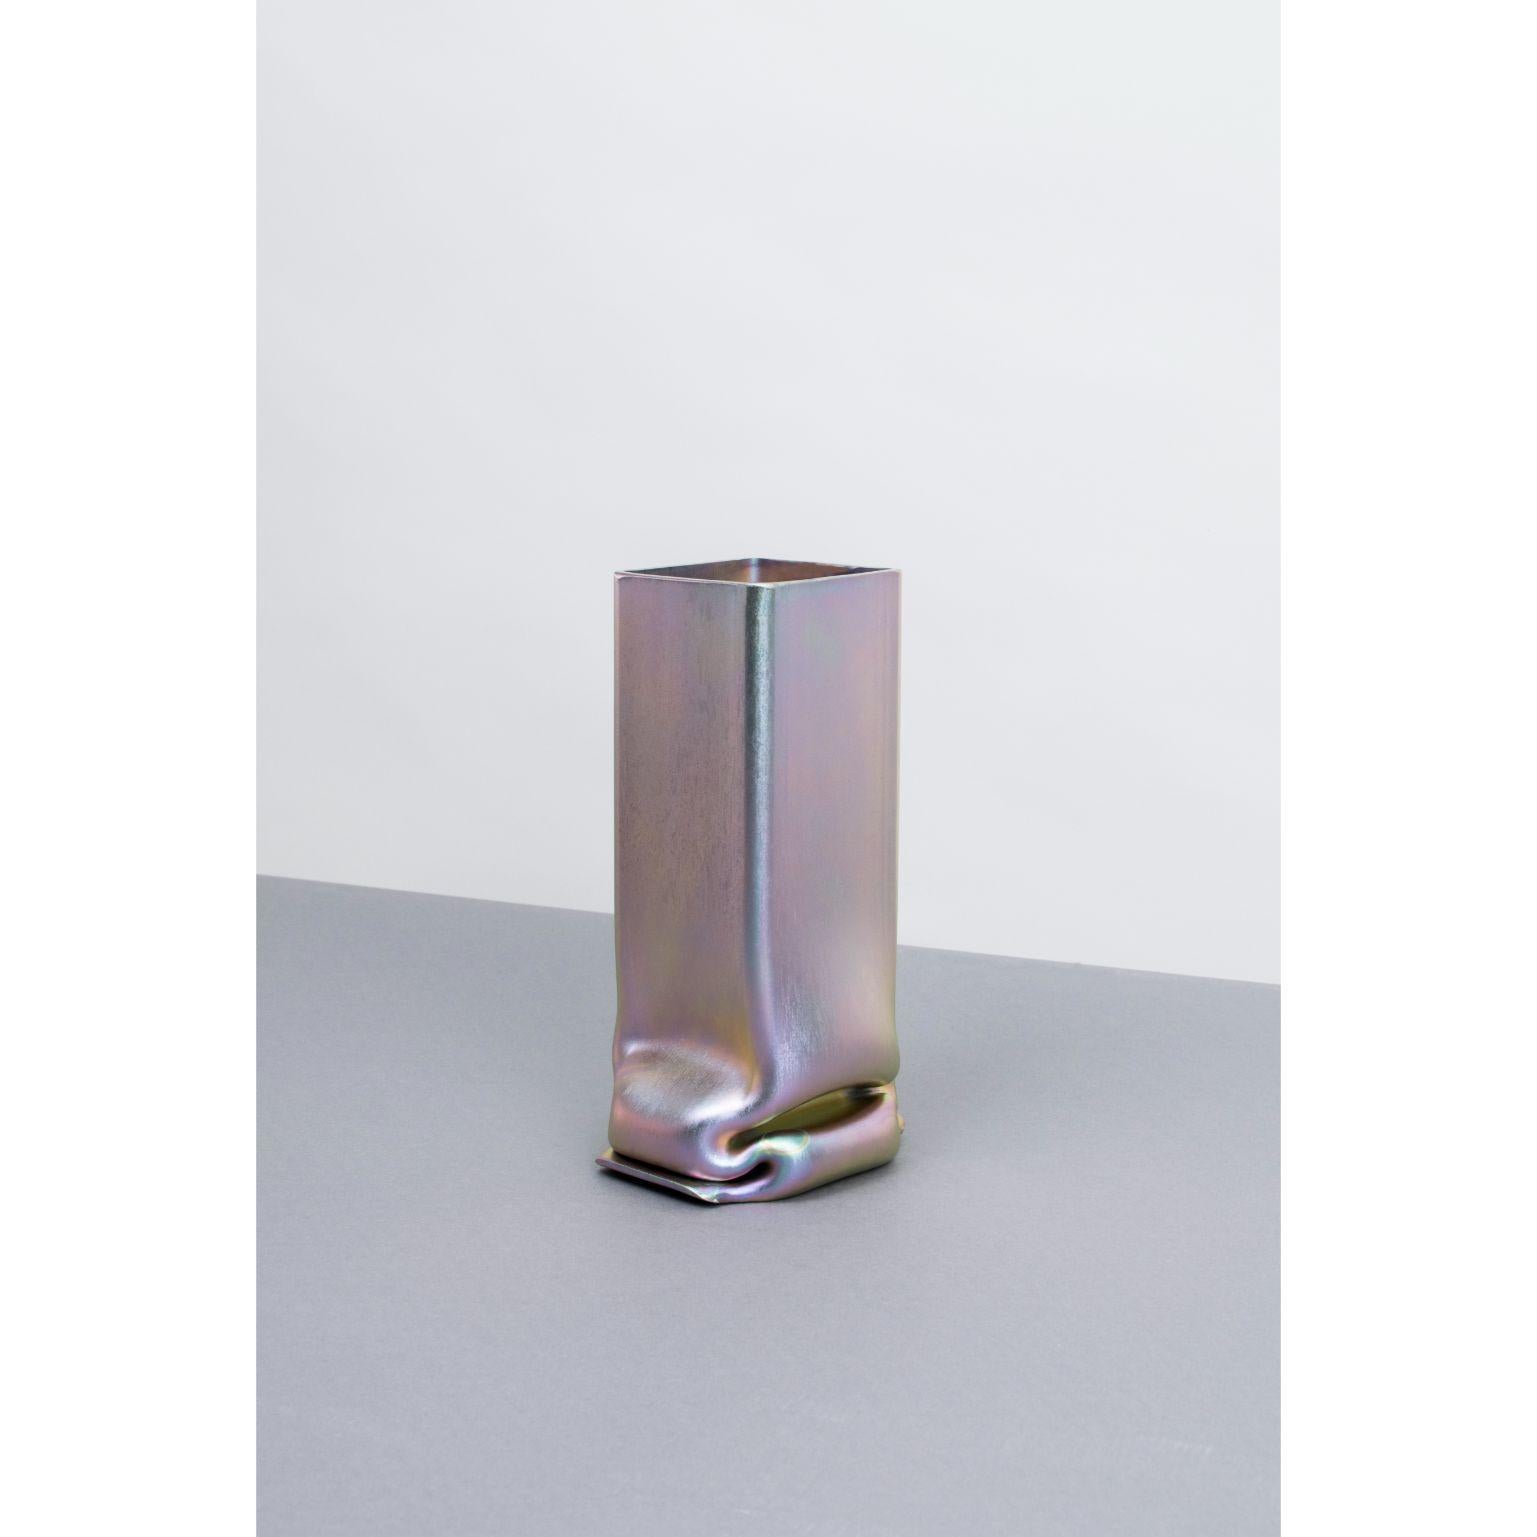 A set of zinc & chrome / stainless steel plated pressure vases XL by Tim Teven
Pressure Series (2018 - Ongoing)
Dimensions: 20 x 10 x 48 cm
Materials: zinc and chrome/stainless steel plated

Also available: different sizes, colors, and